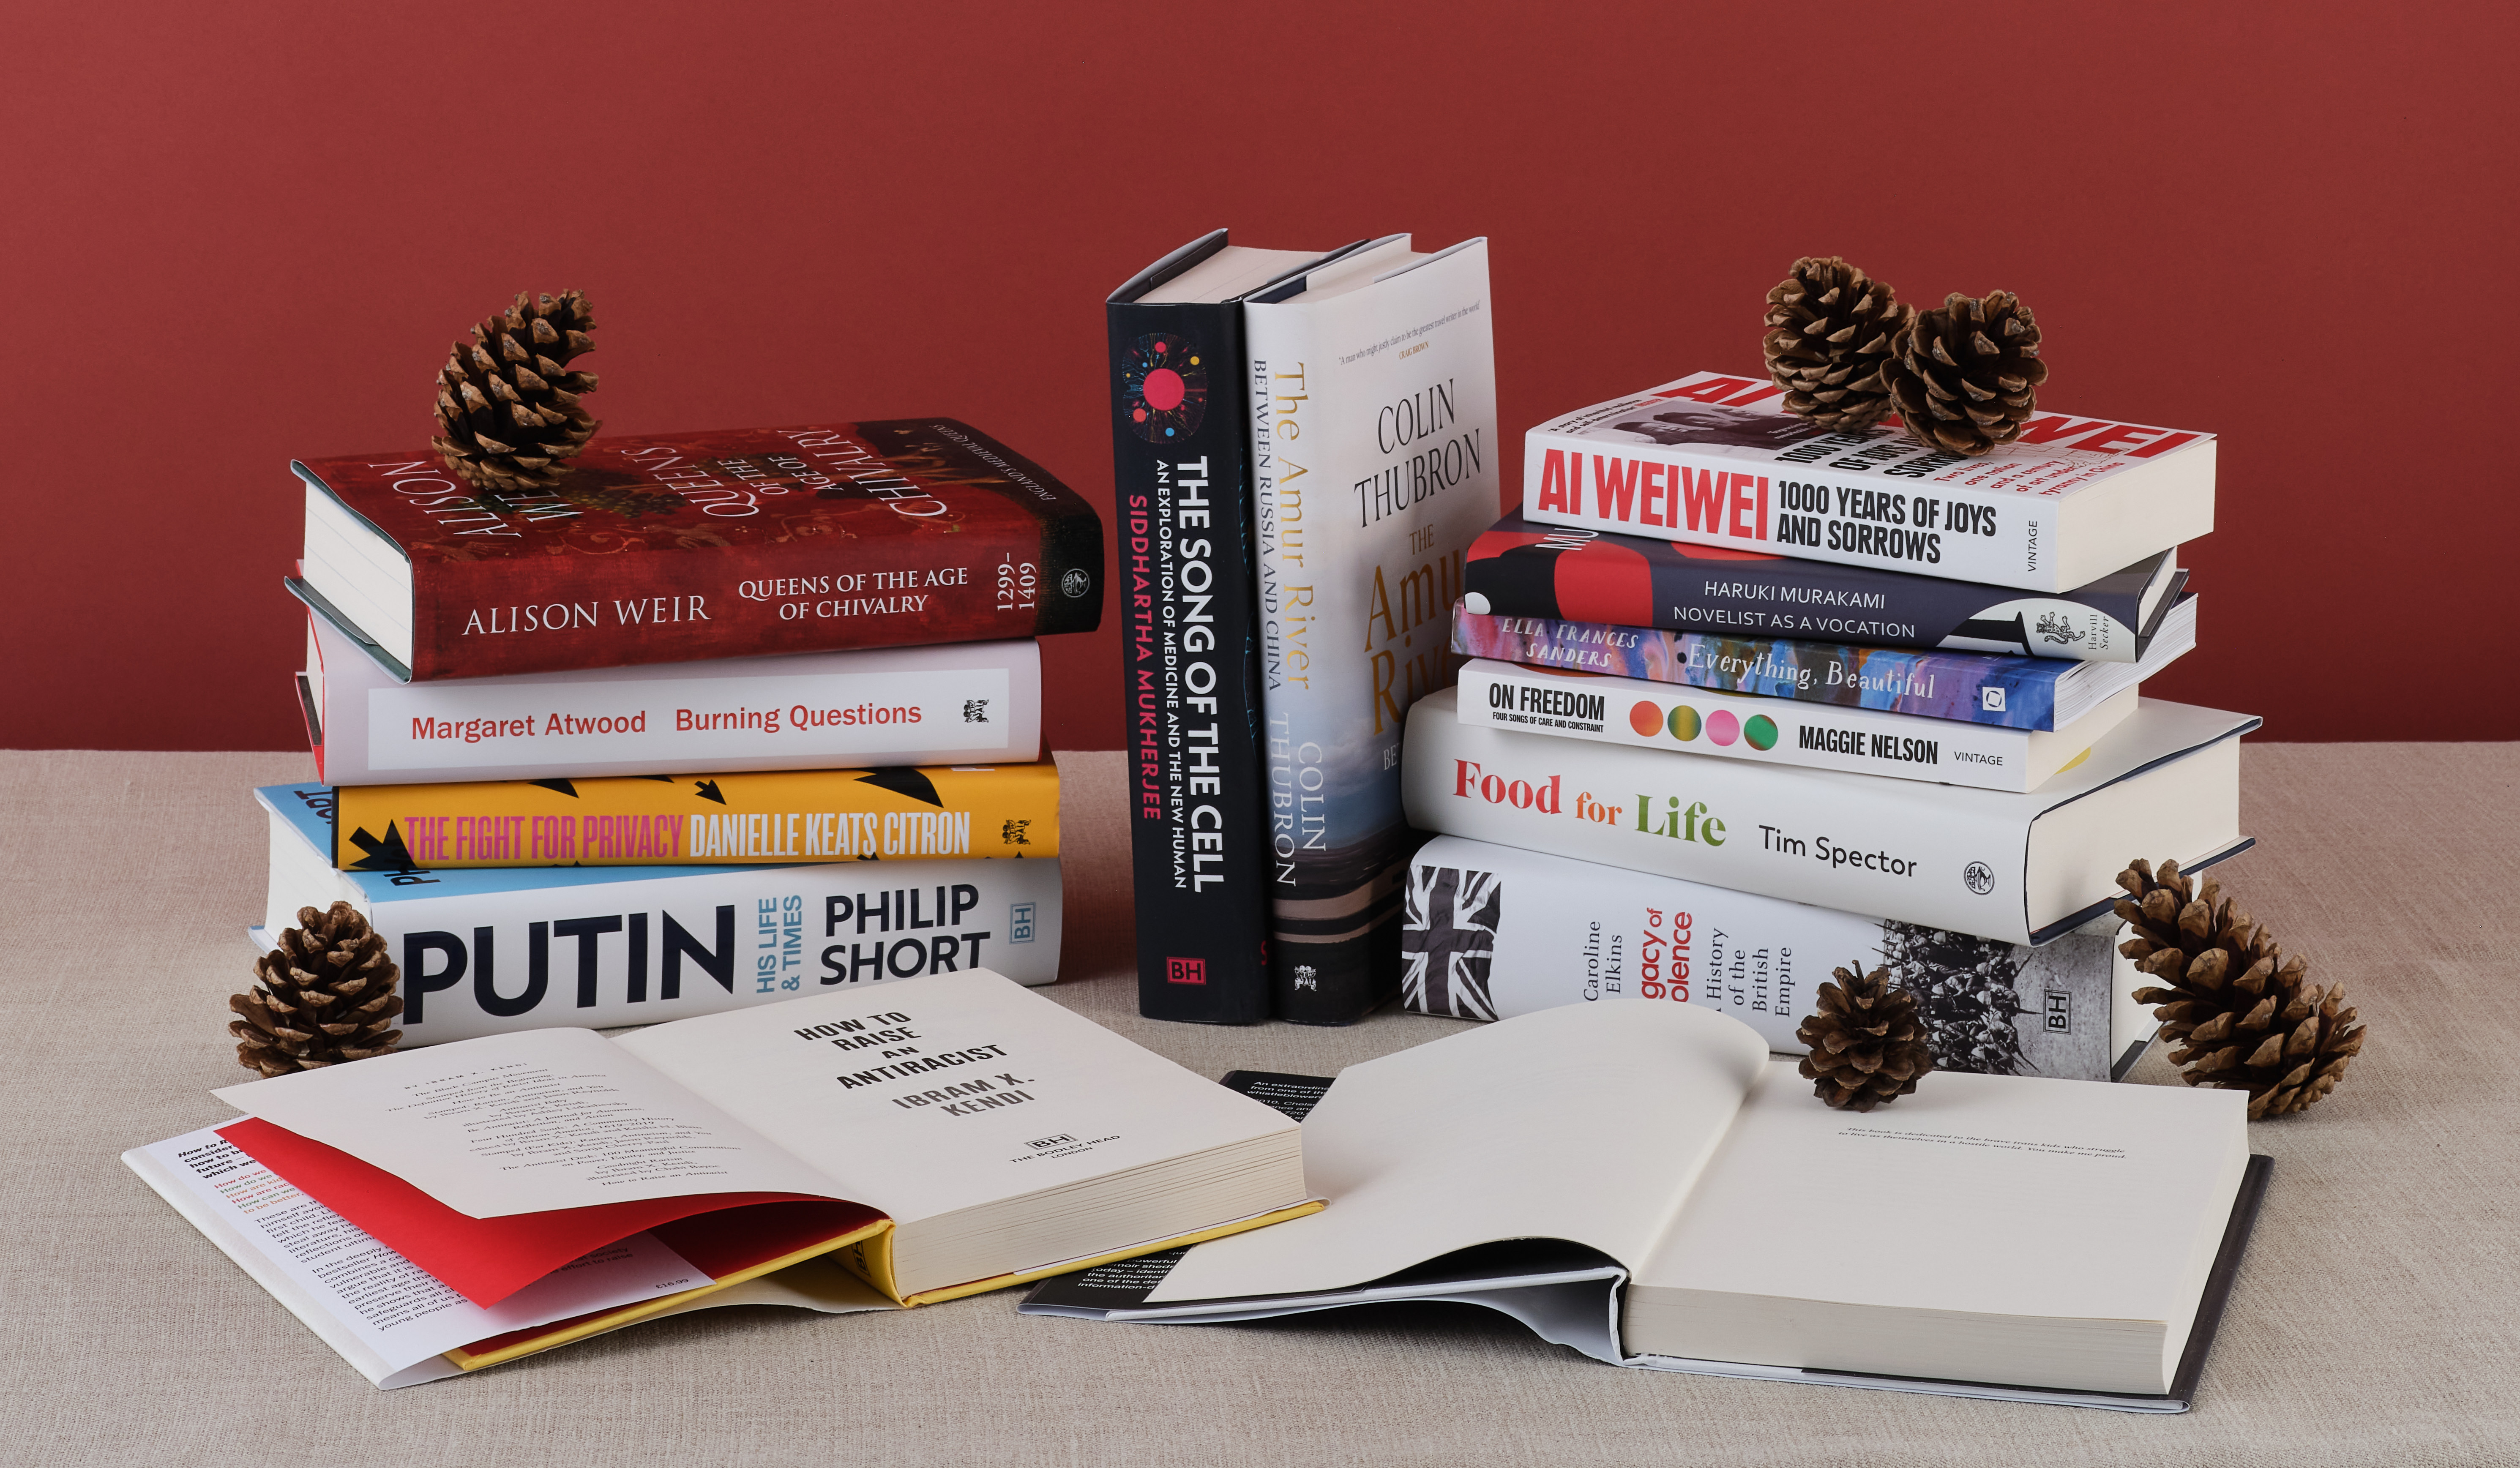 Selection of books in front of red background with pine cones.